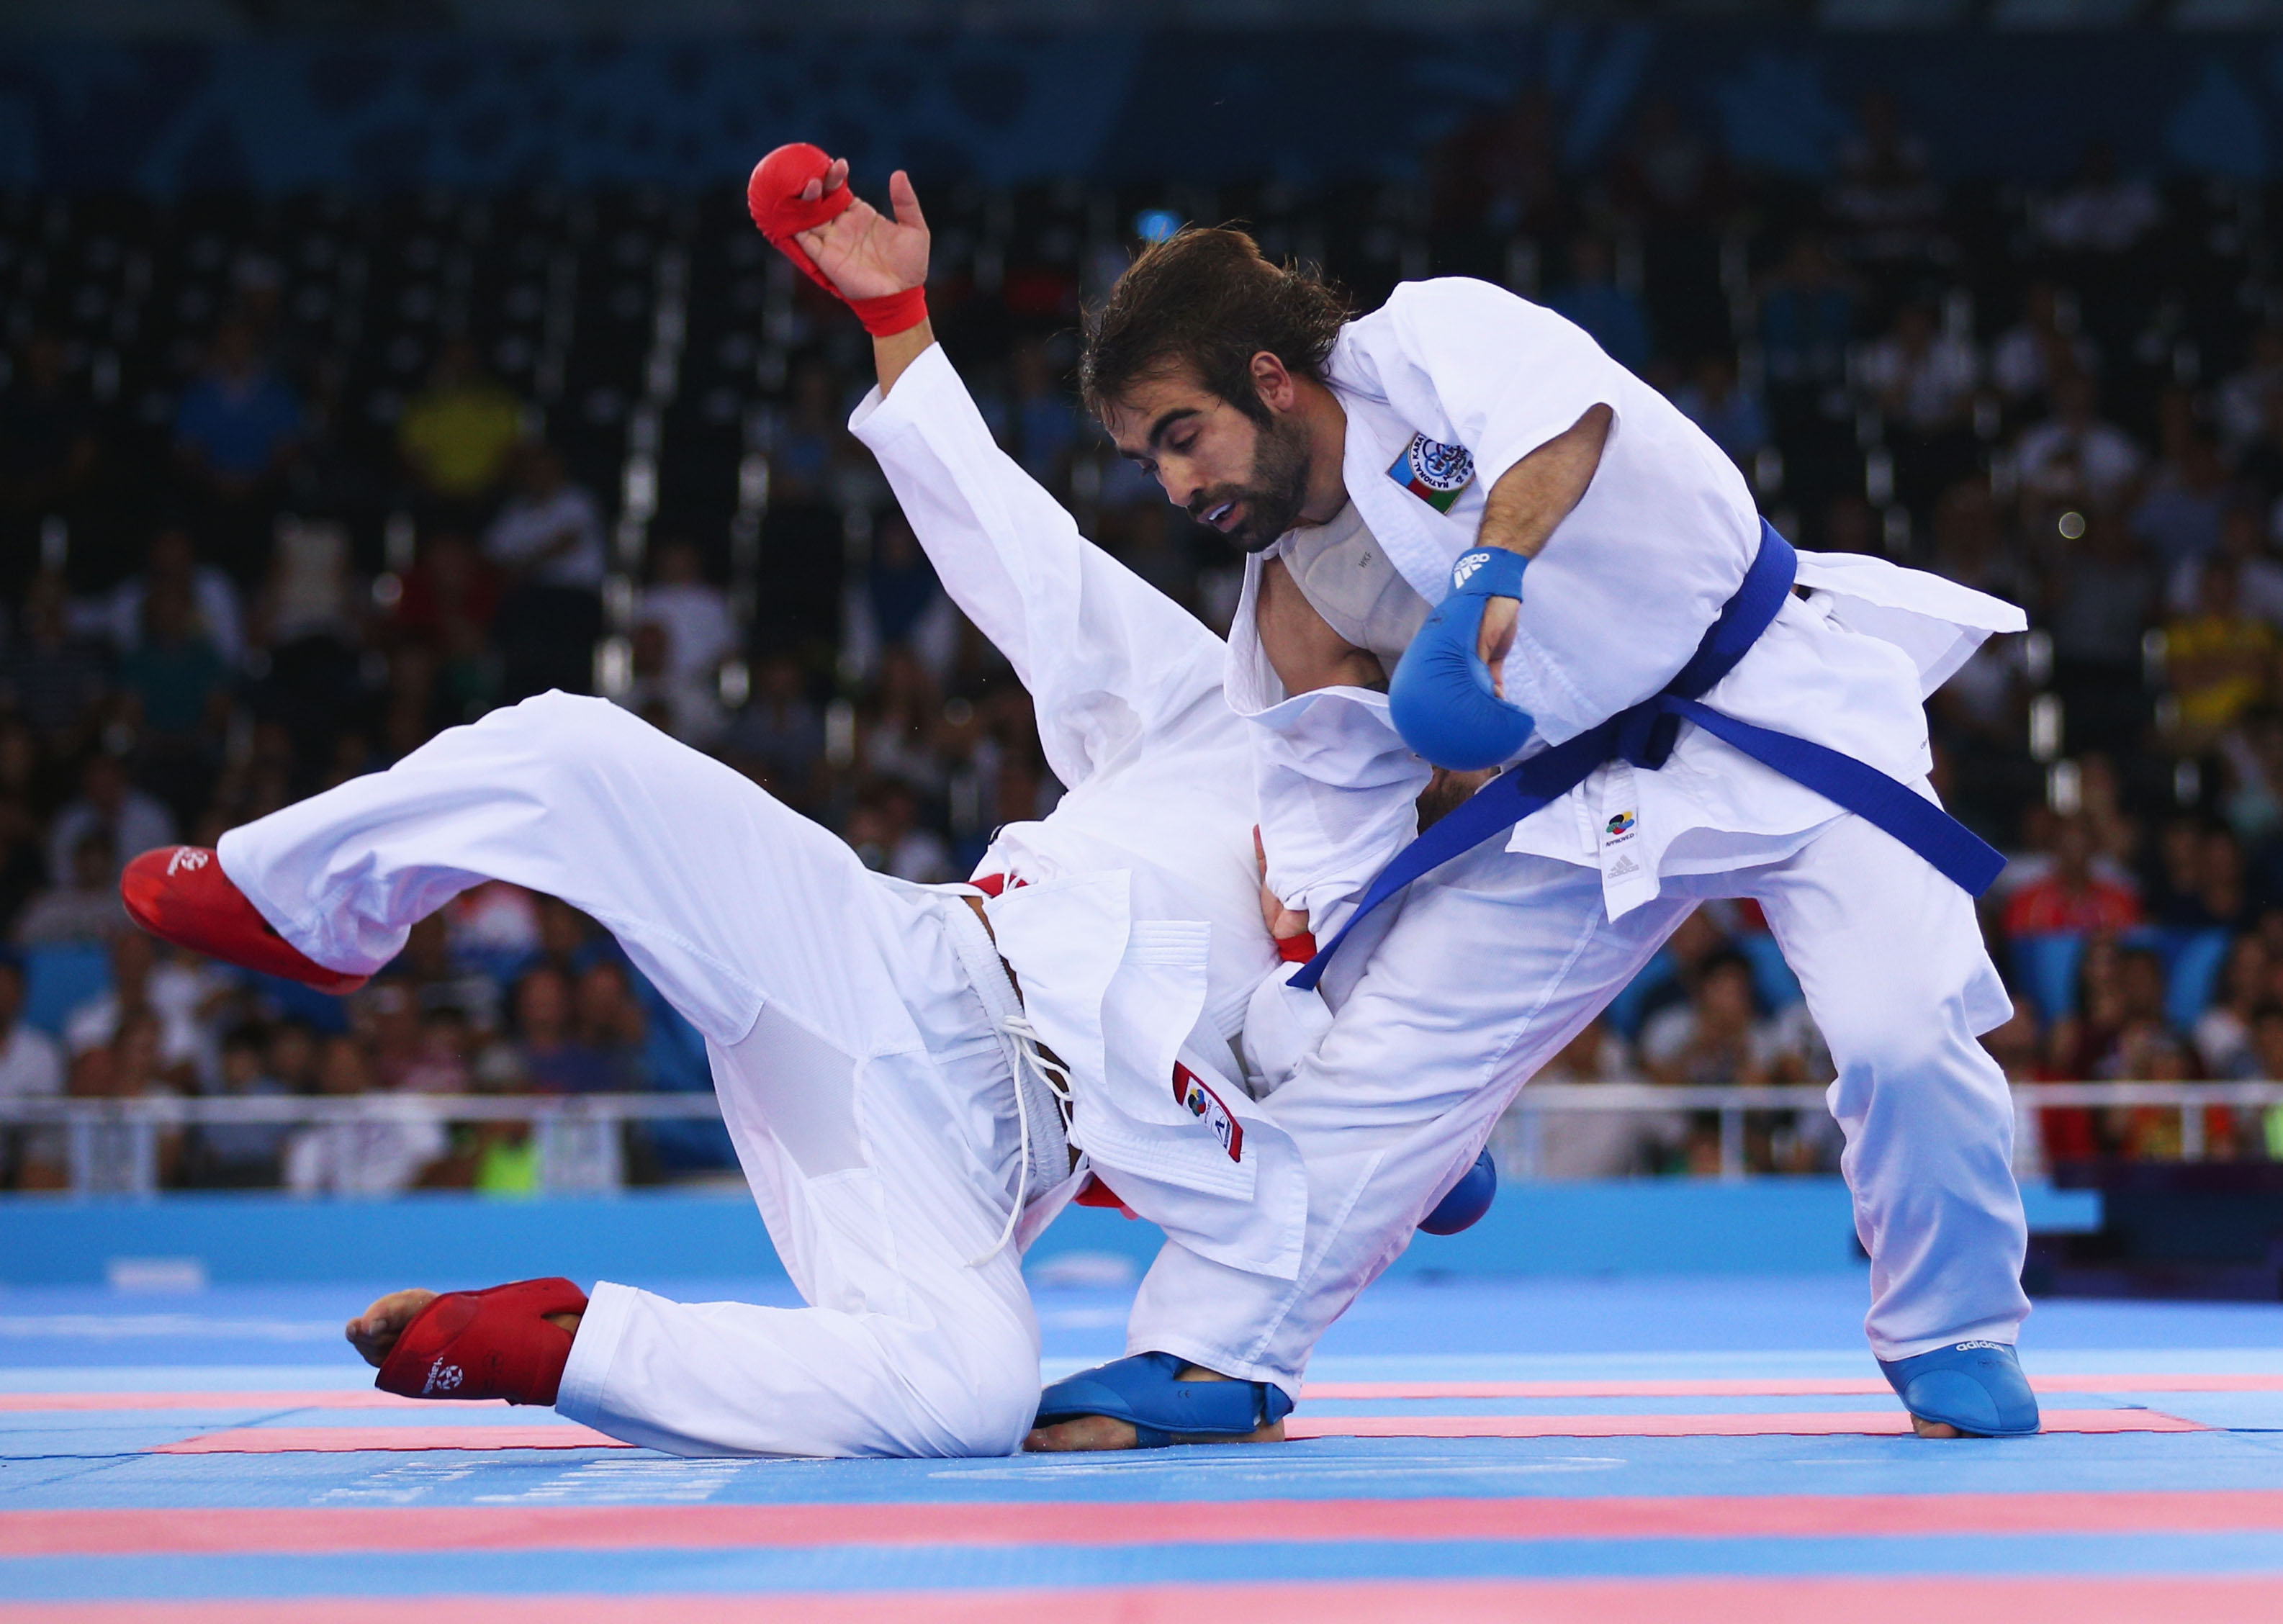 Rafael Aghayev of Azerbaijan (blue) competes with Luigi Busa of Italy (red) during the Men's Kumite -75kg final on day one of the Baku 2015 European Games, June 13, 2015.